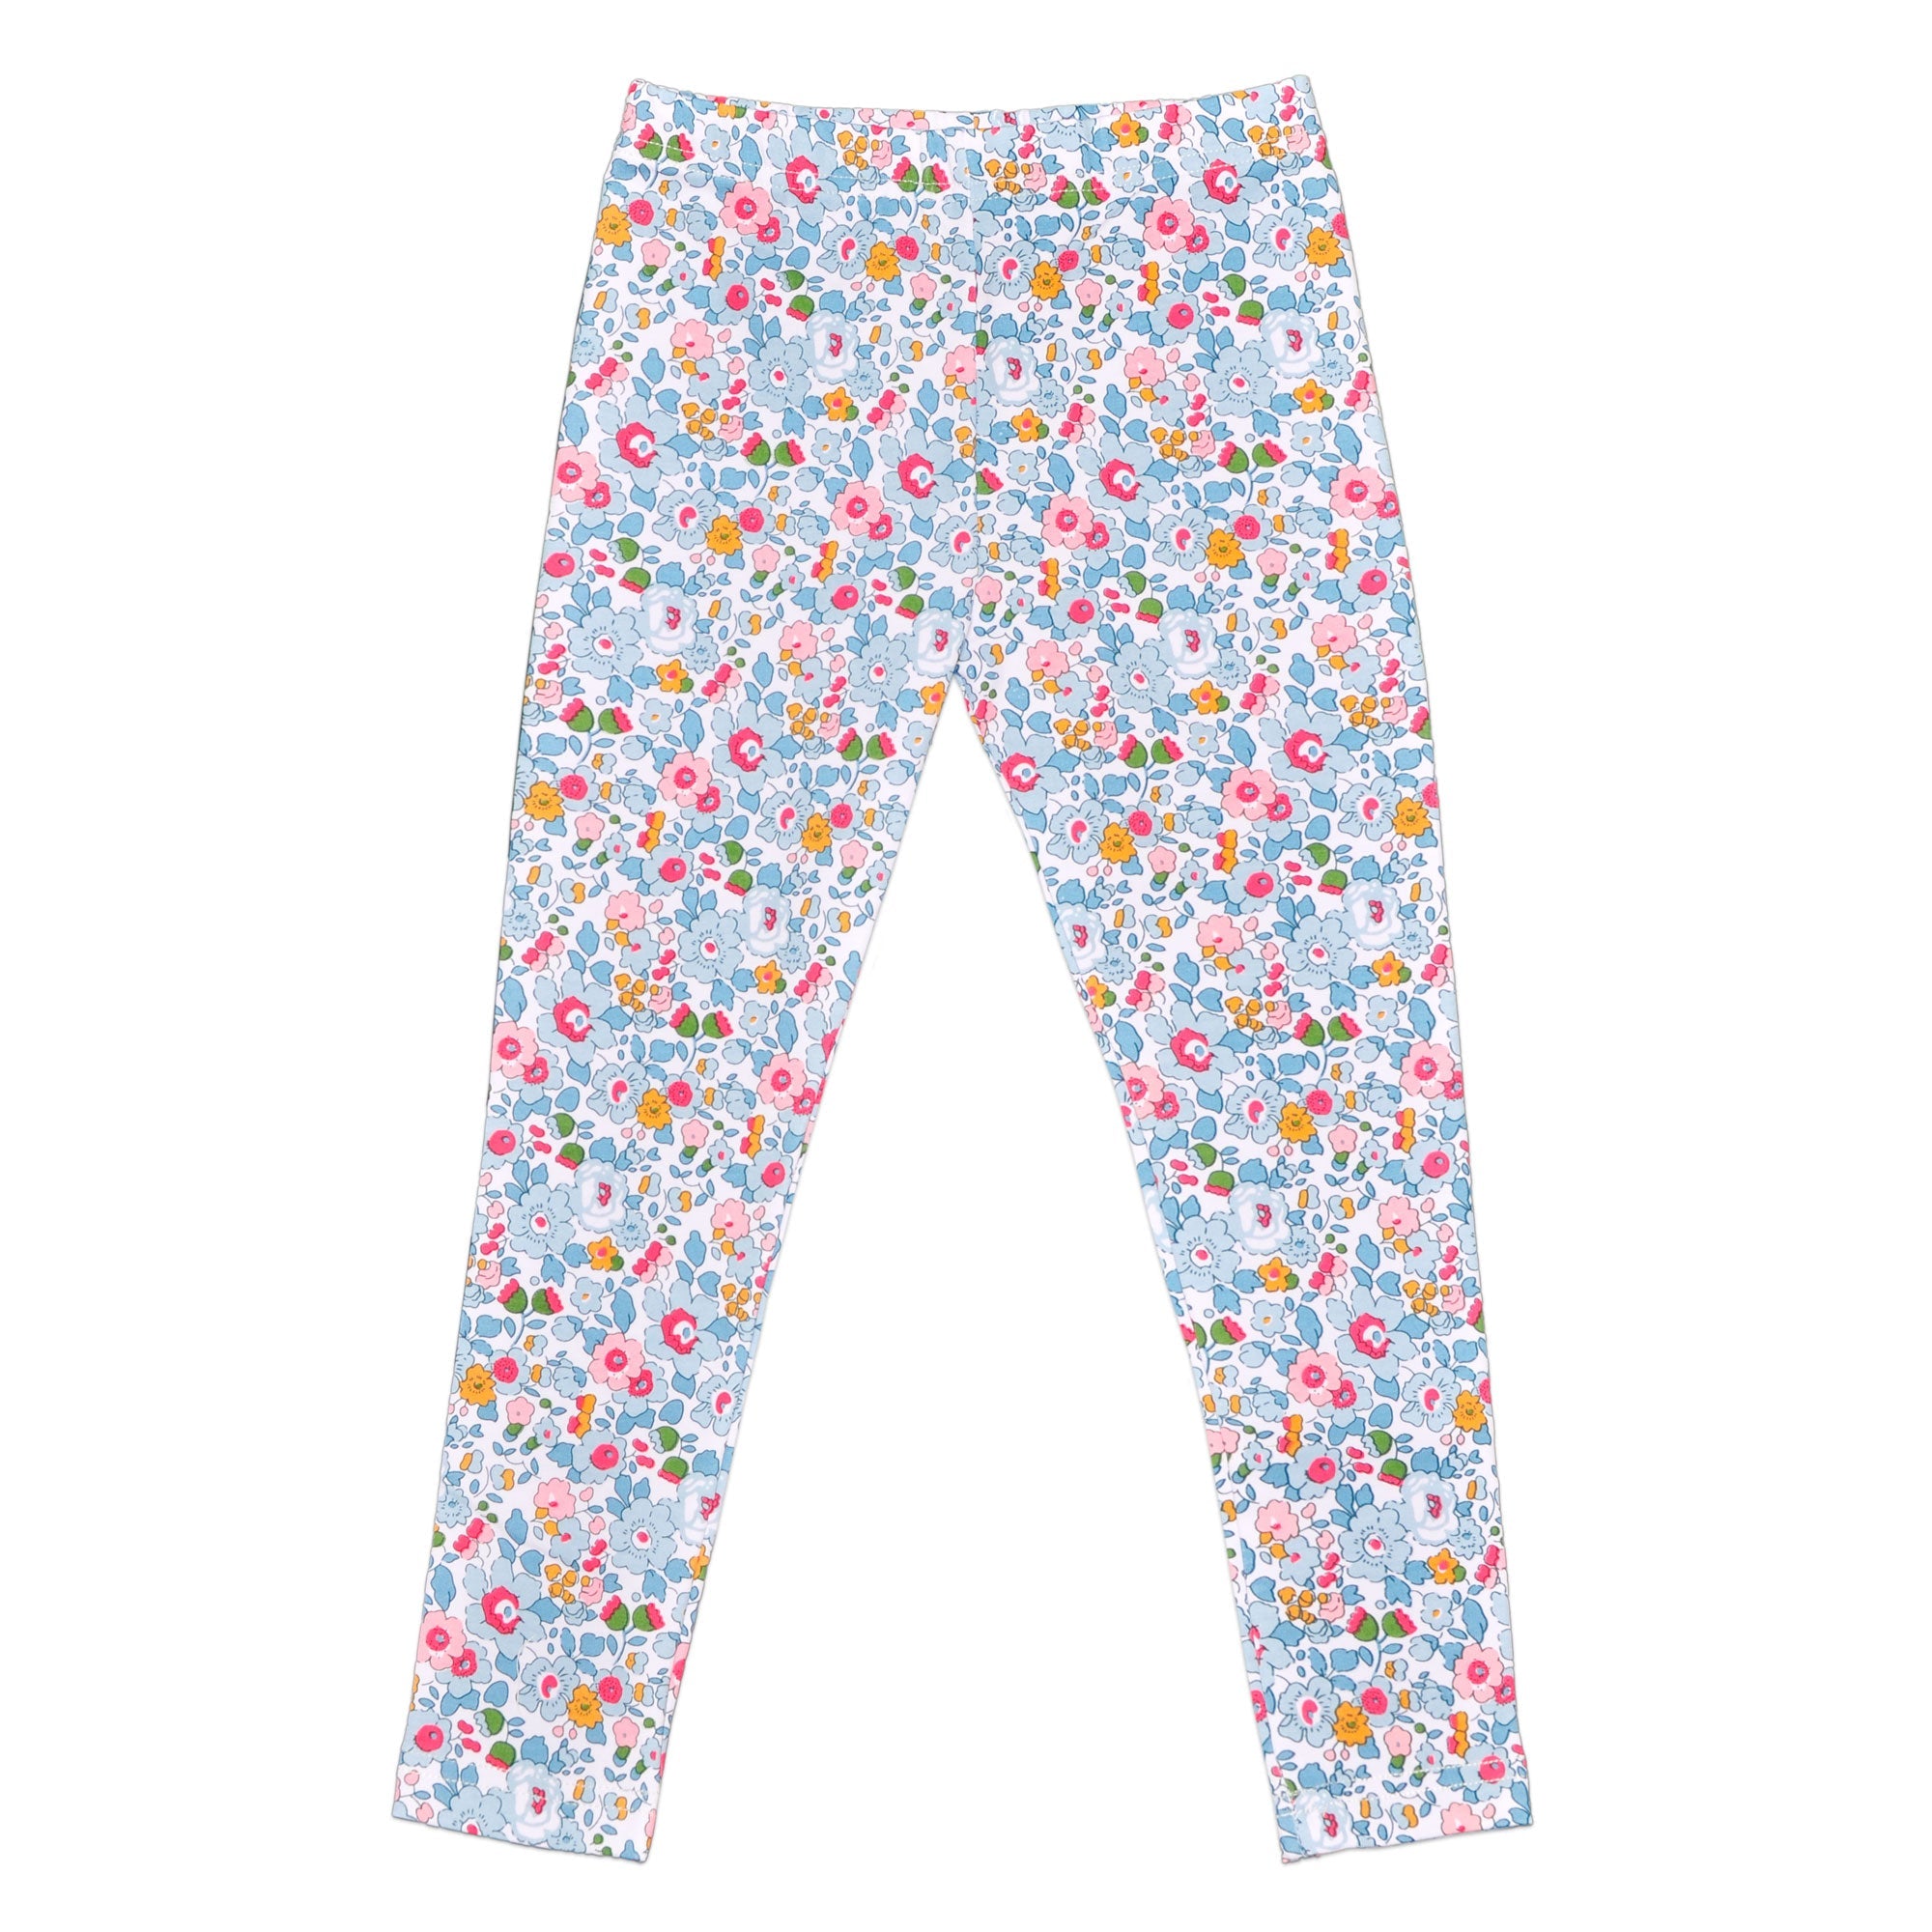 Bessie Pale Blue Liberty Print Leggings - Cou Cou Baby